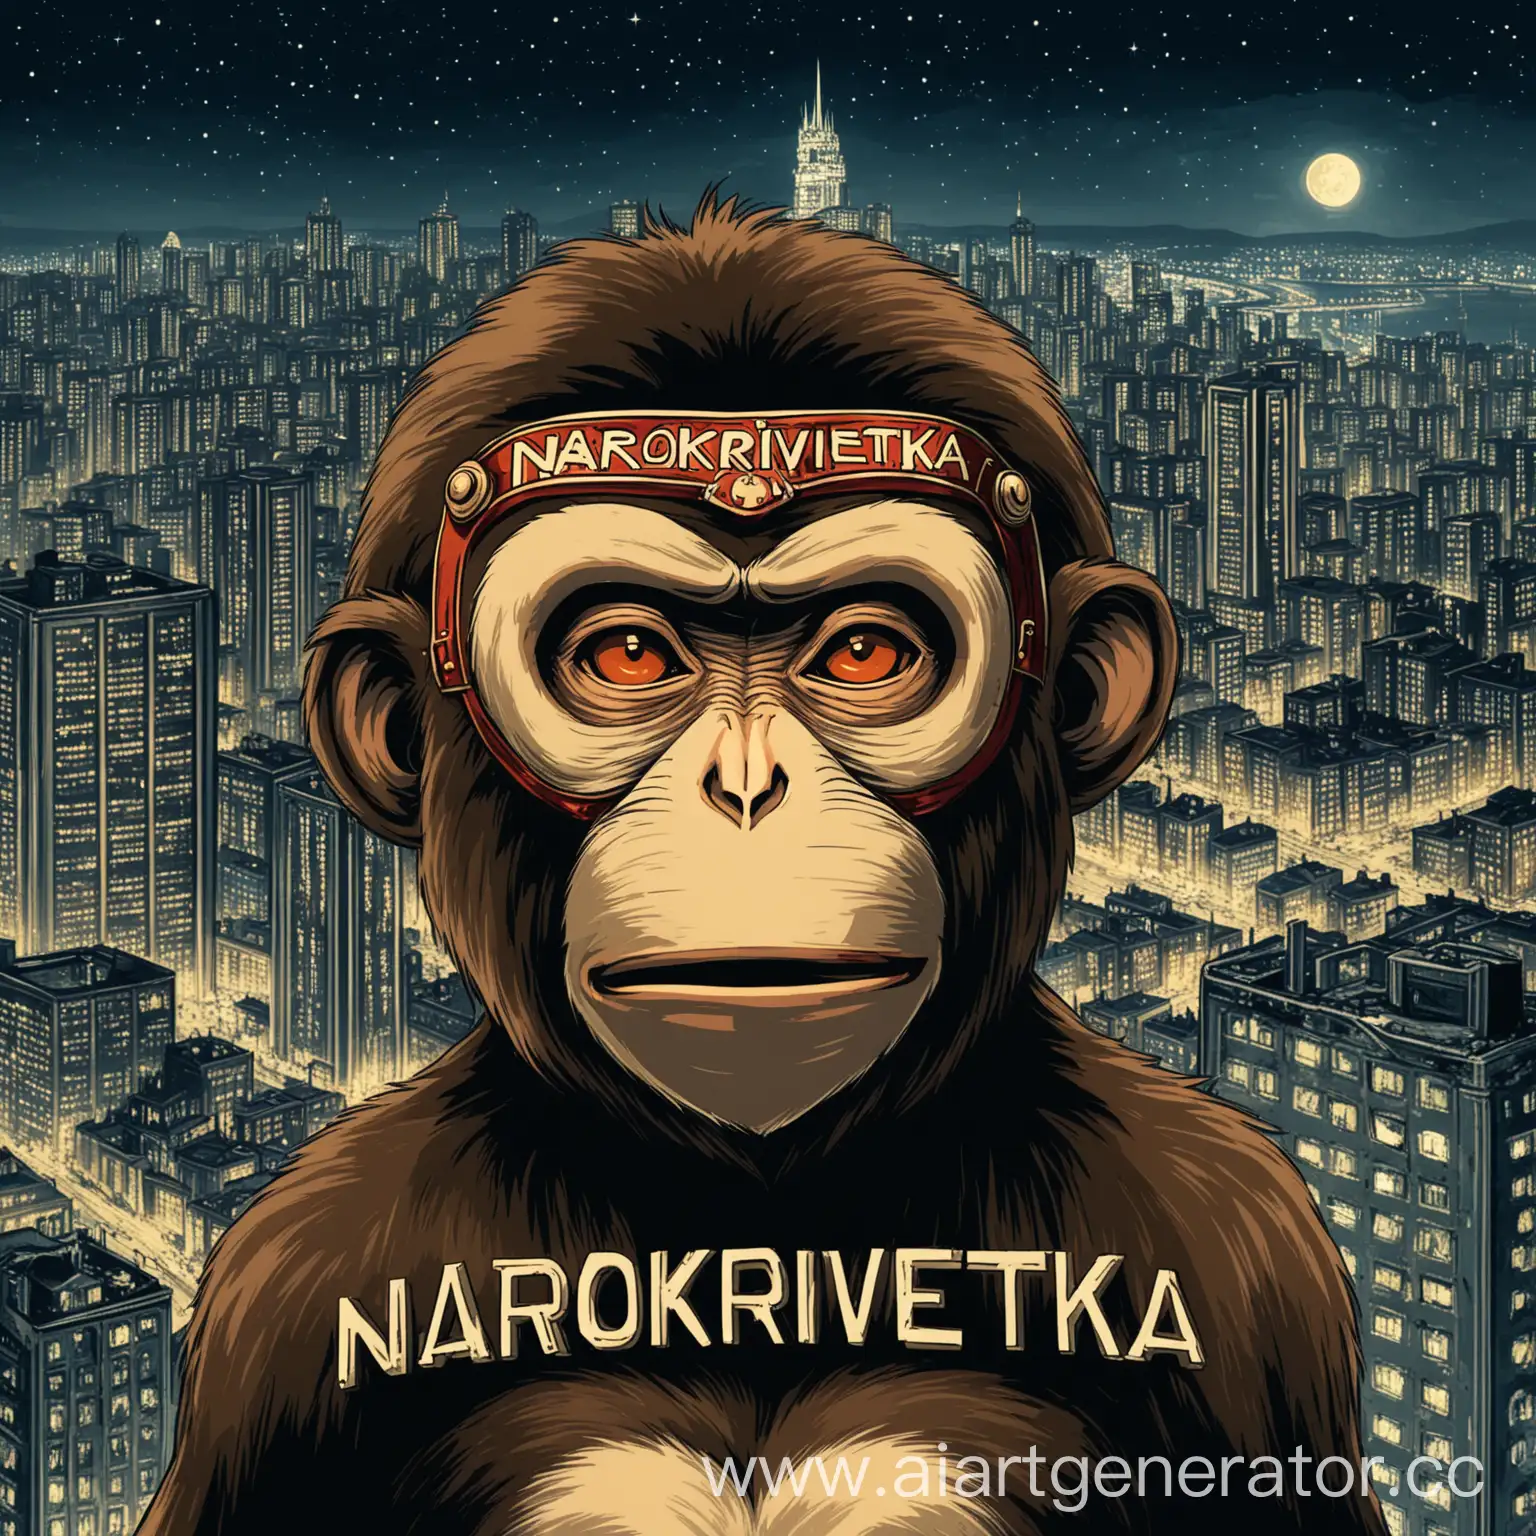 A monkey in a mask, a night metropolis in the background and the inscription “NaroKrivetka”